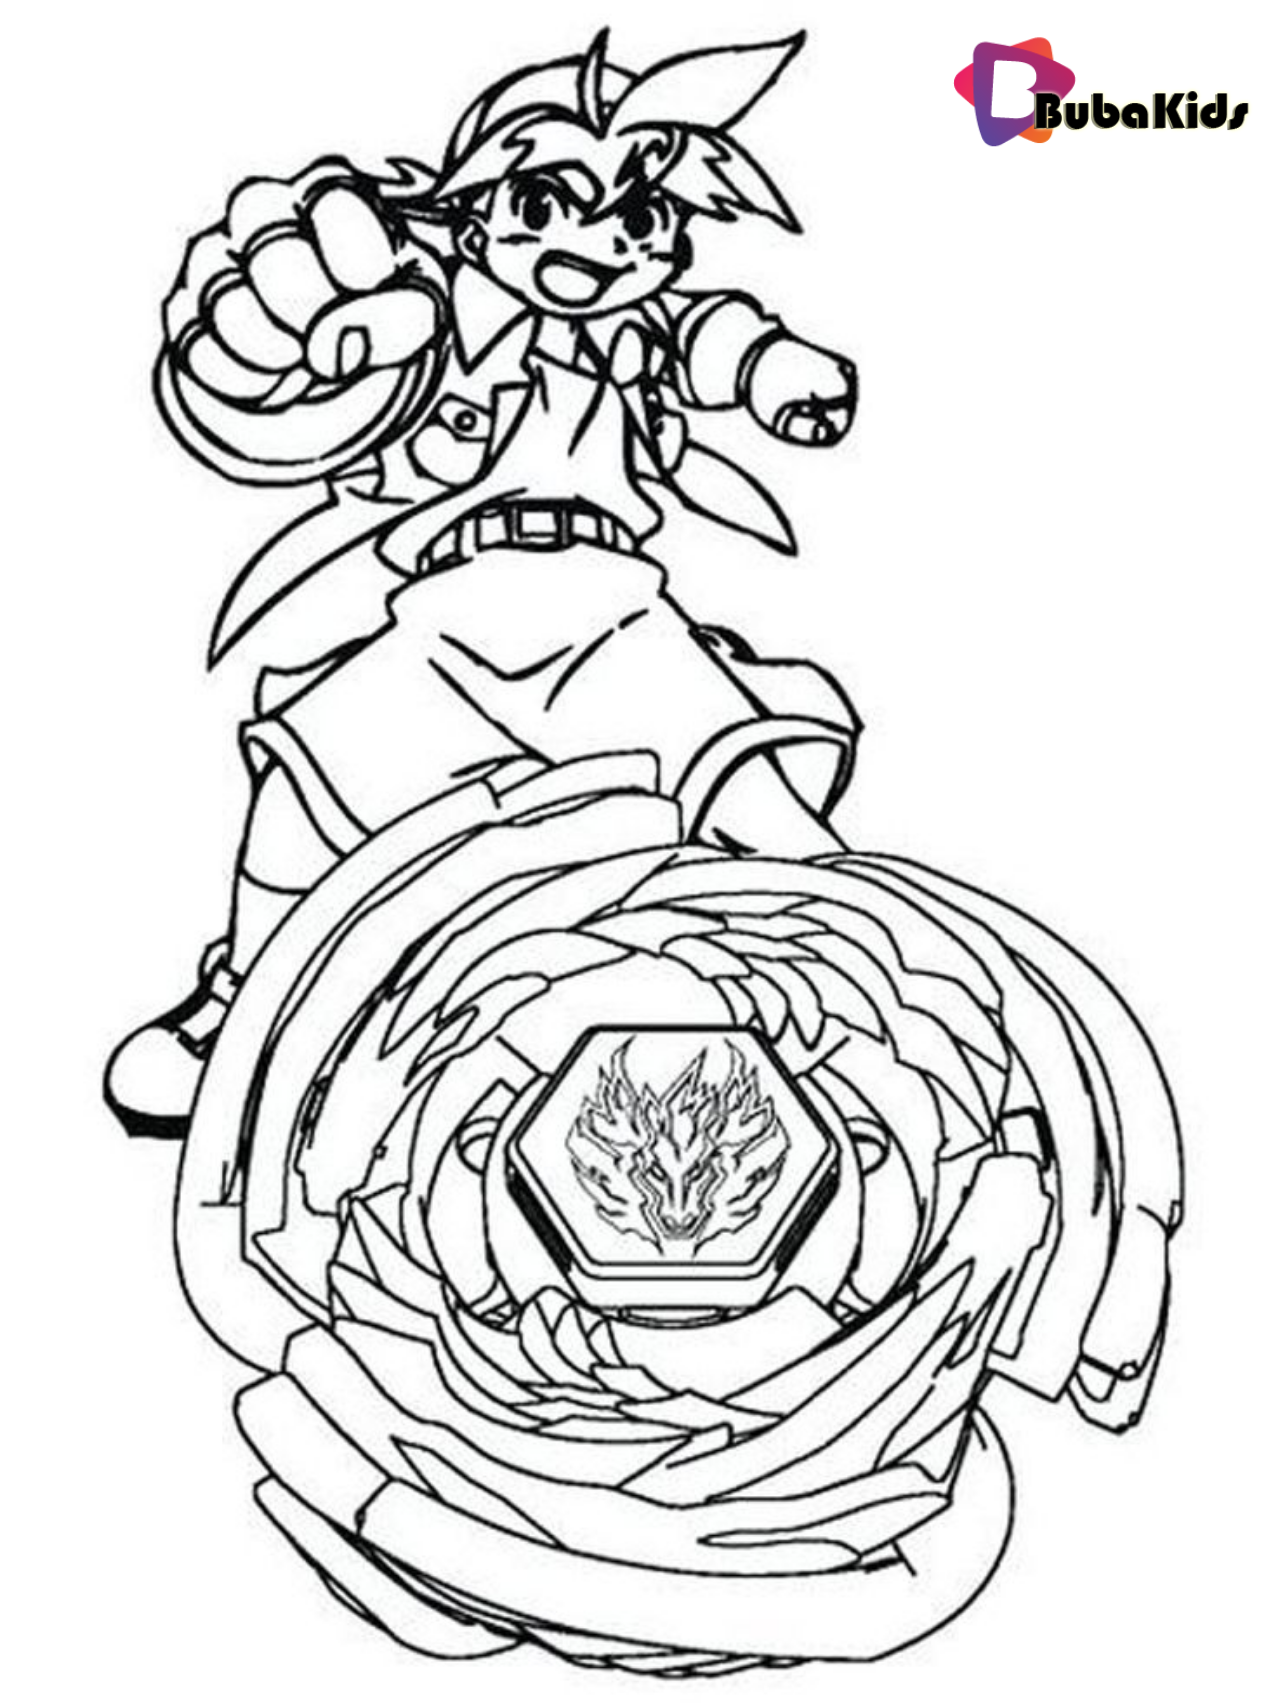 Beyblade Burst Coloring Page – Printable Coloring Ideas Wallpaper